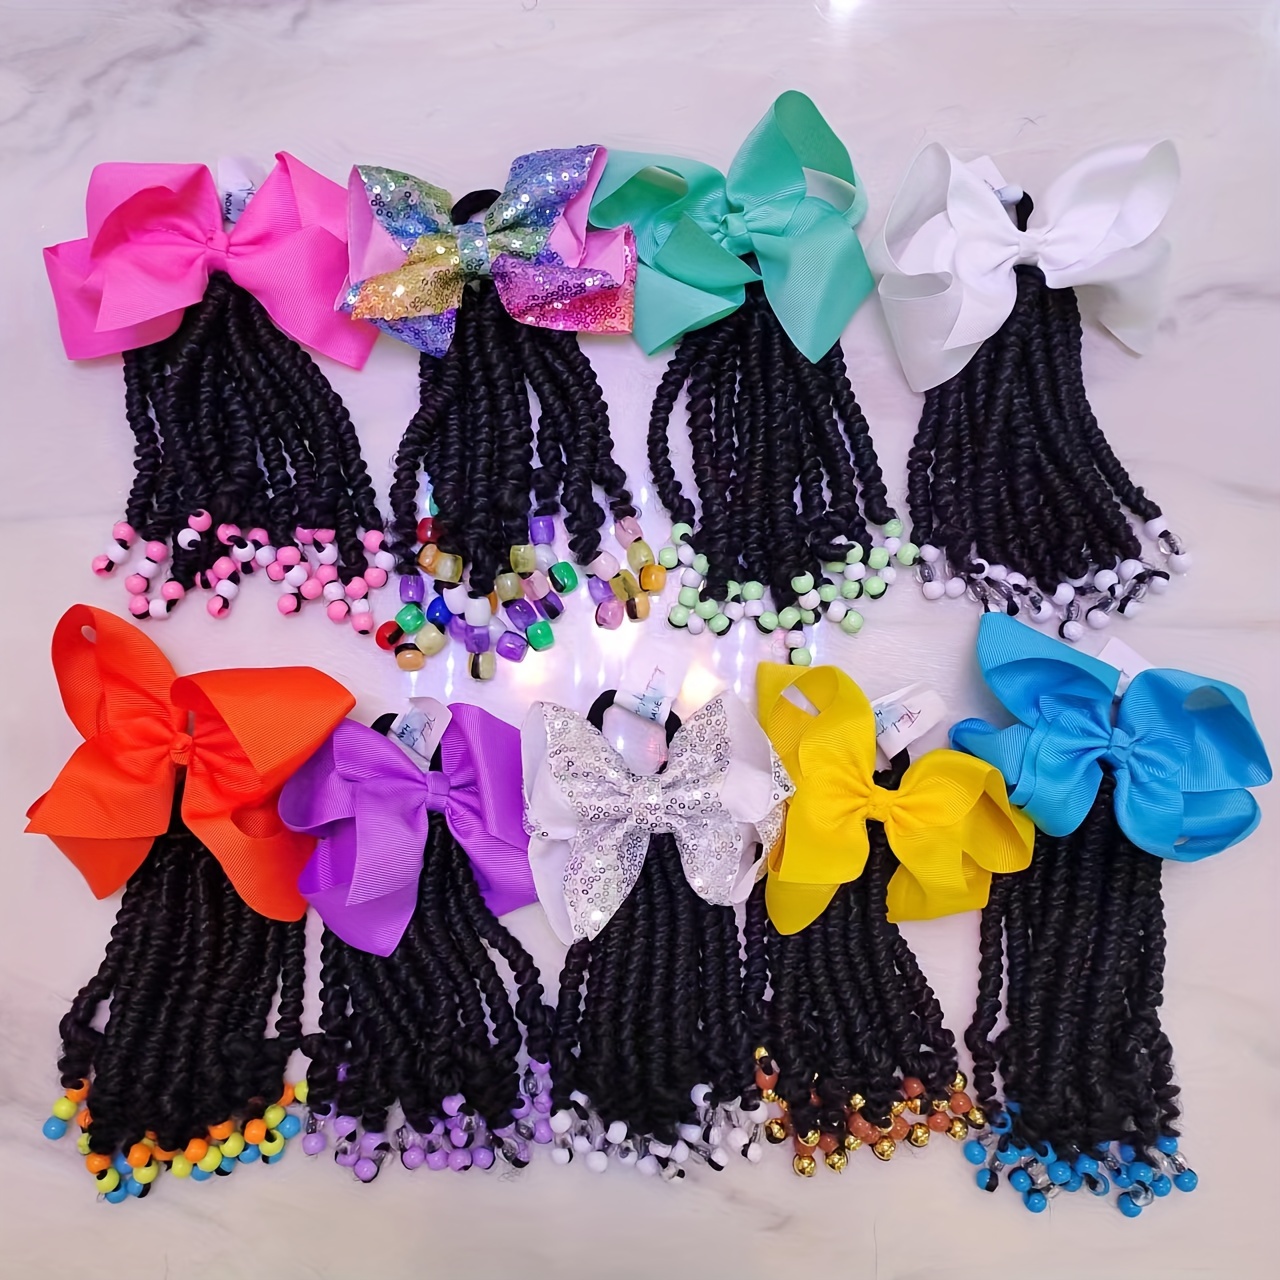 Beaupretty Ponytail Beads and Dreadlocks Hair Extensions with Rubber Bands  Remote Control Mouse Cat Toy Braided Wig Ponytail Beaders for Braids